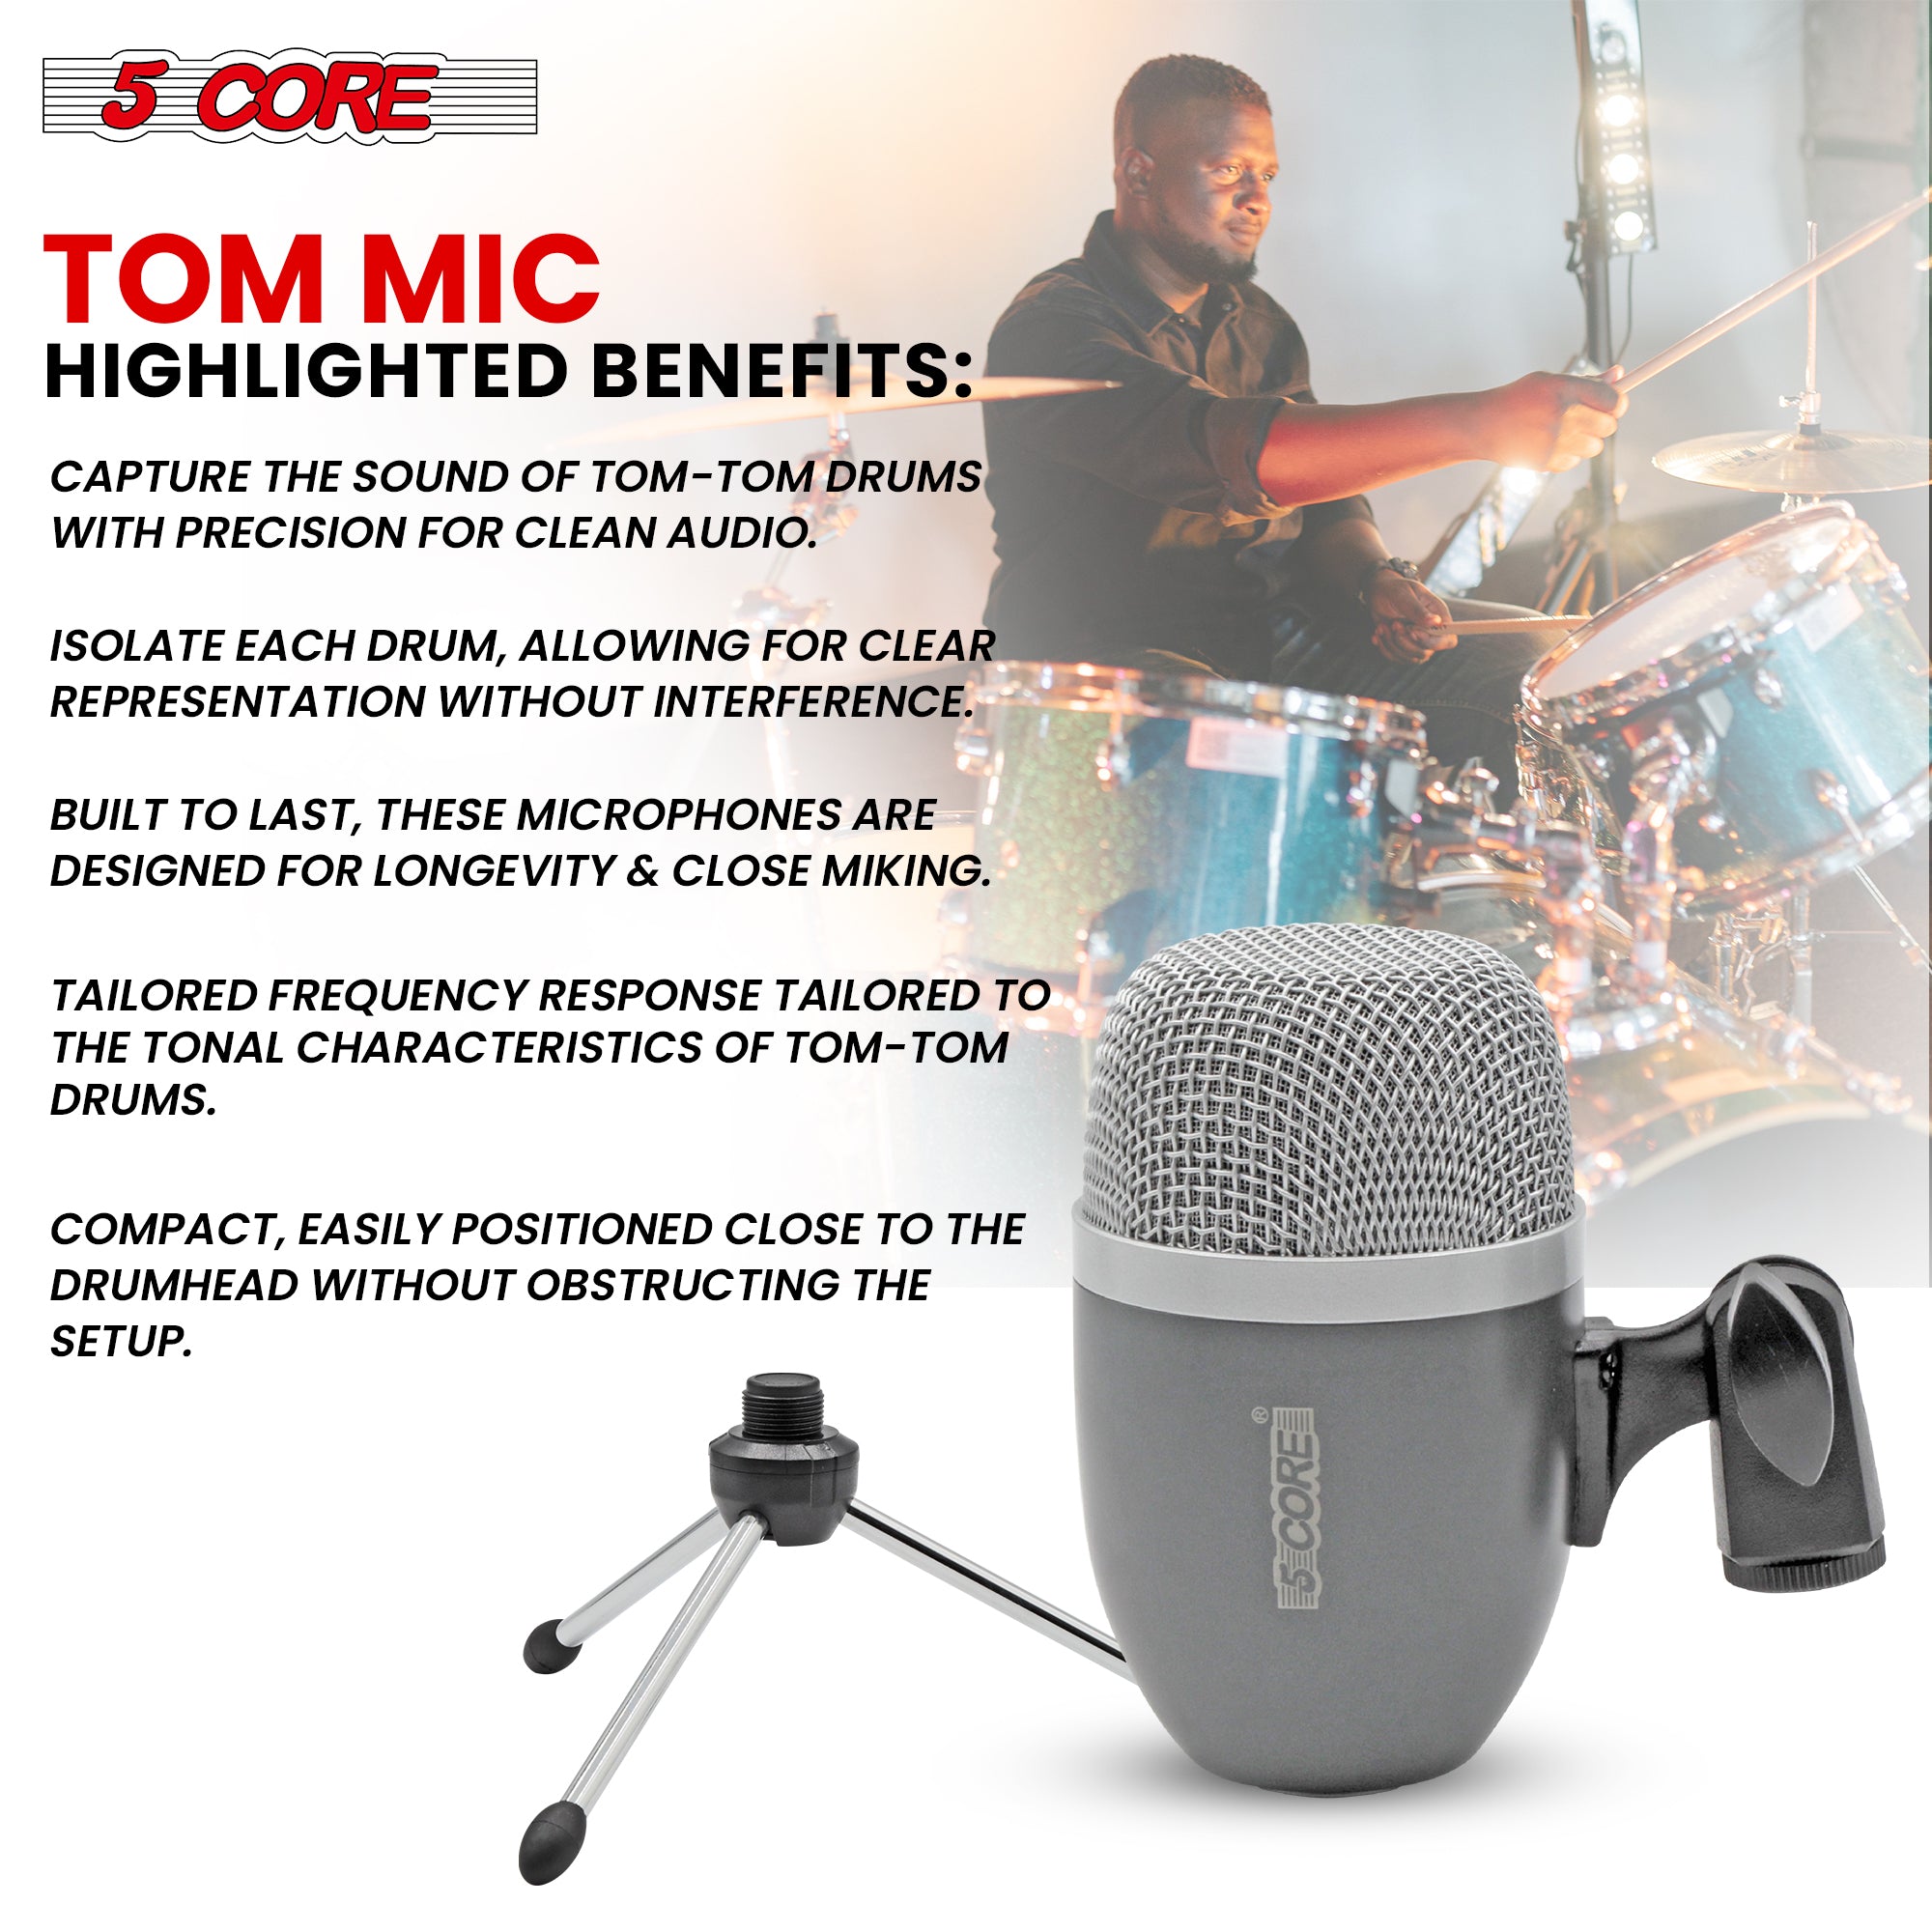 Sleek Grey Dynamic Microphone - 5 Core TOM MIC GREY, Perfect for Drum Kits and Precision Instruments.